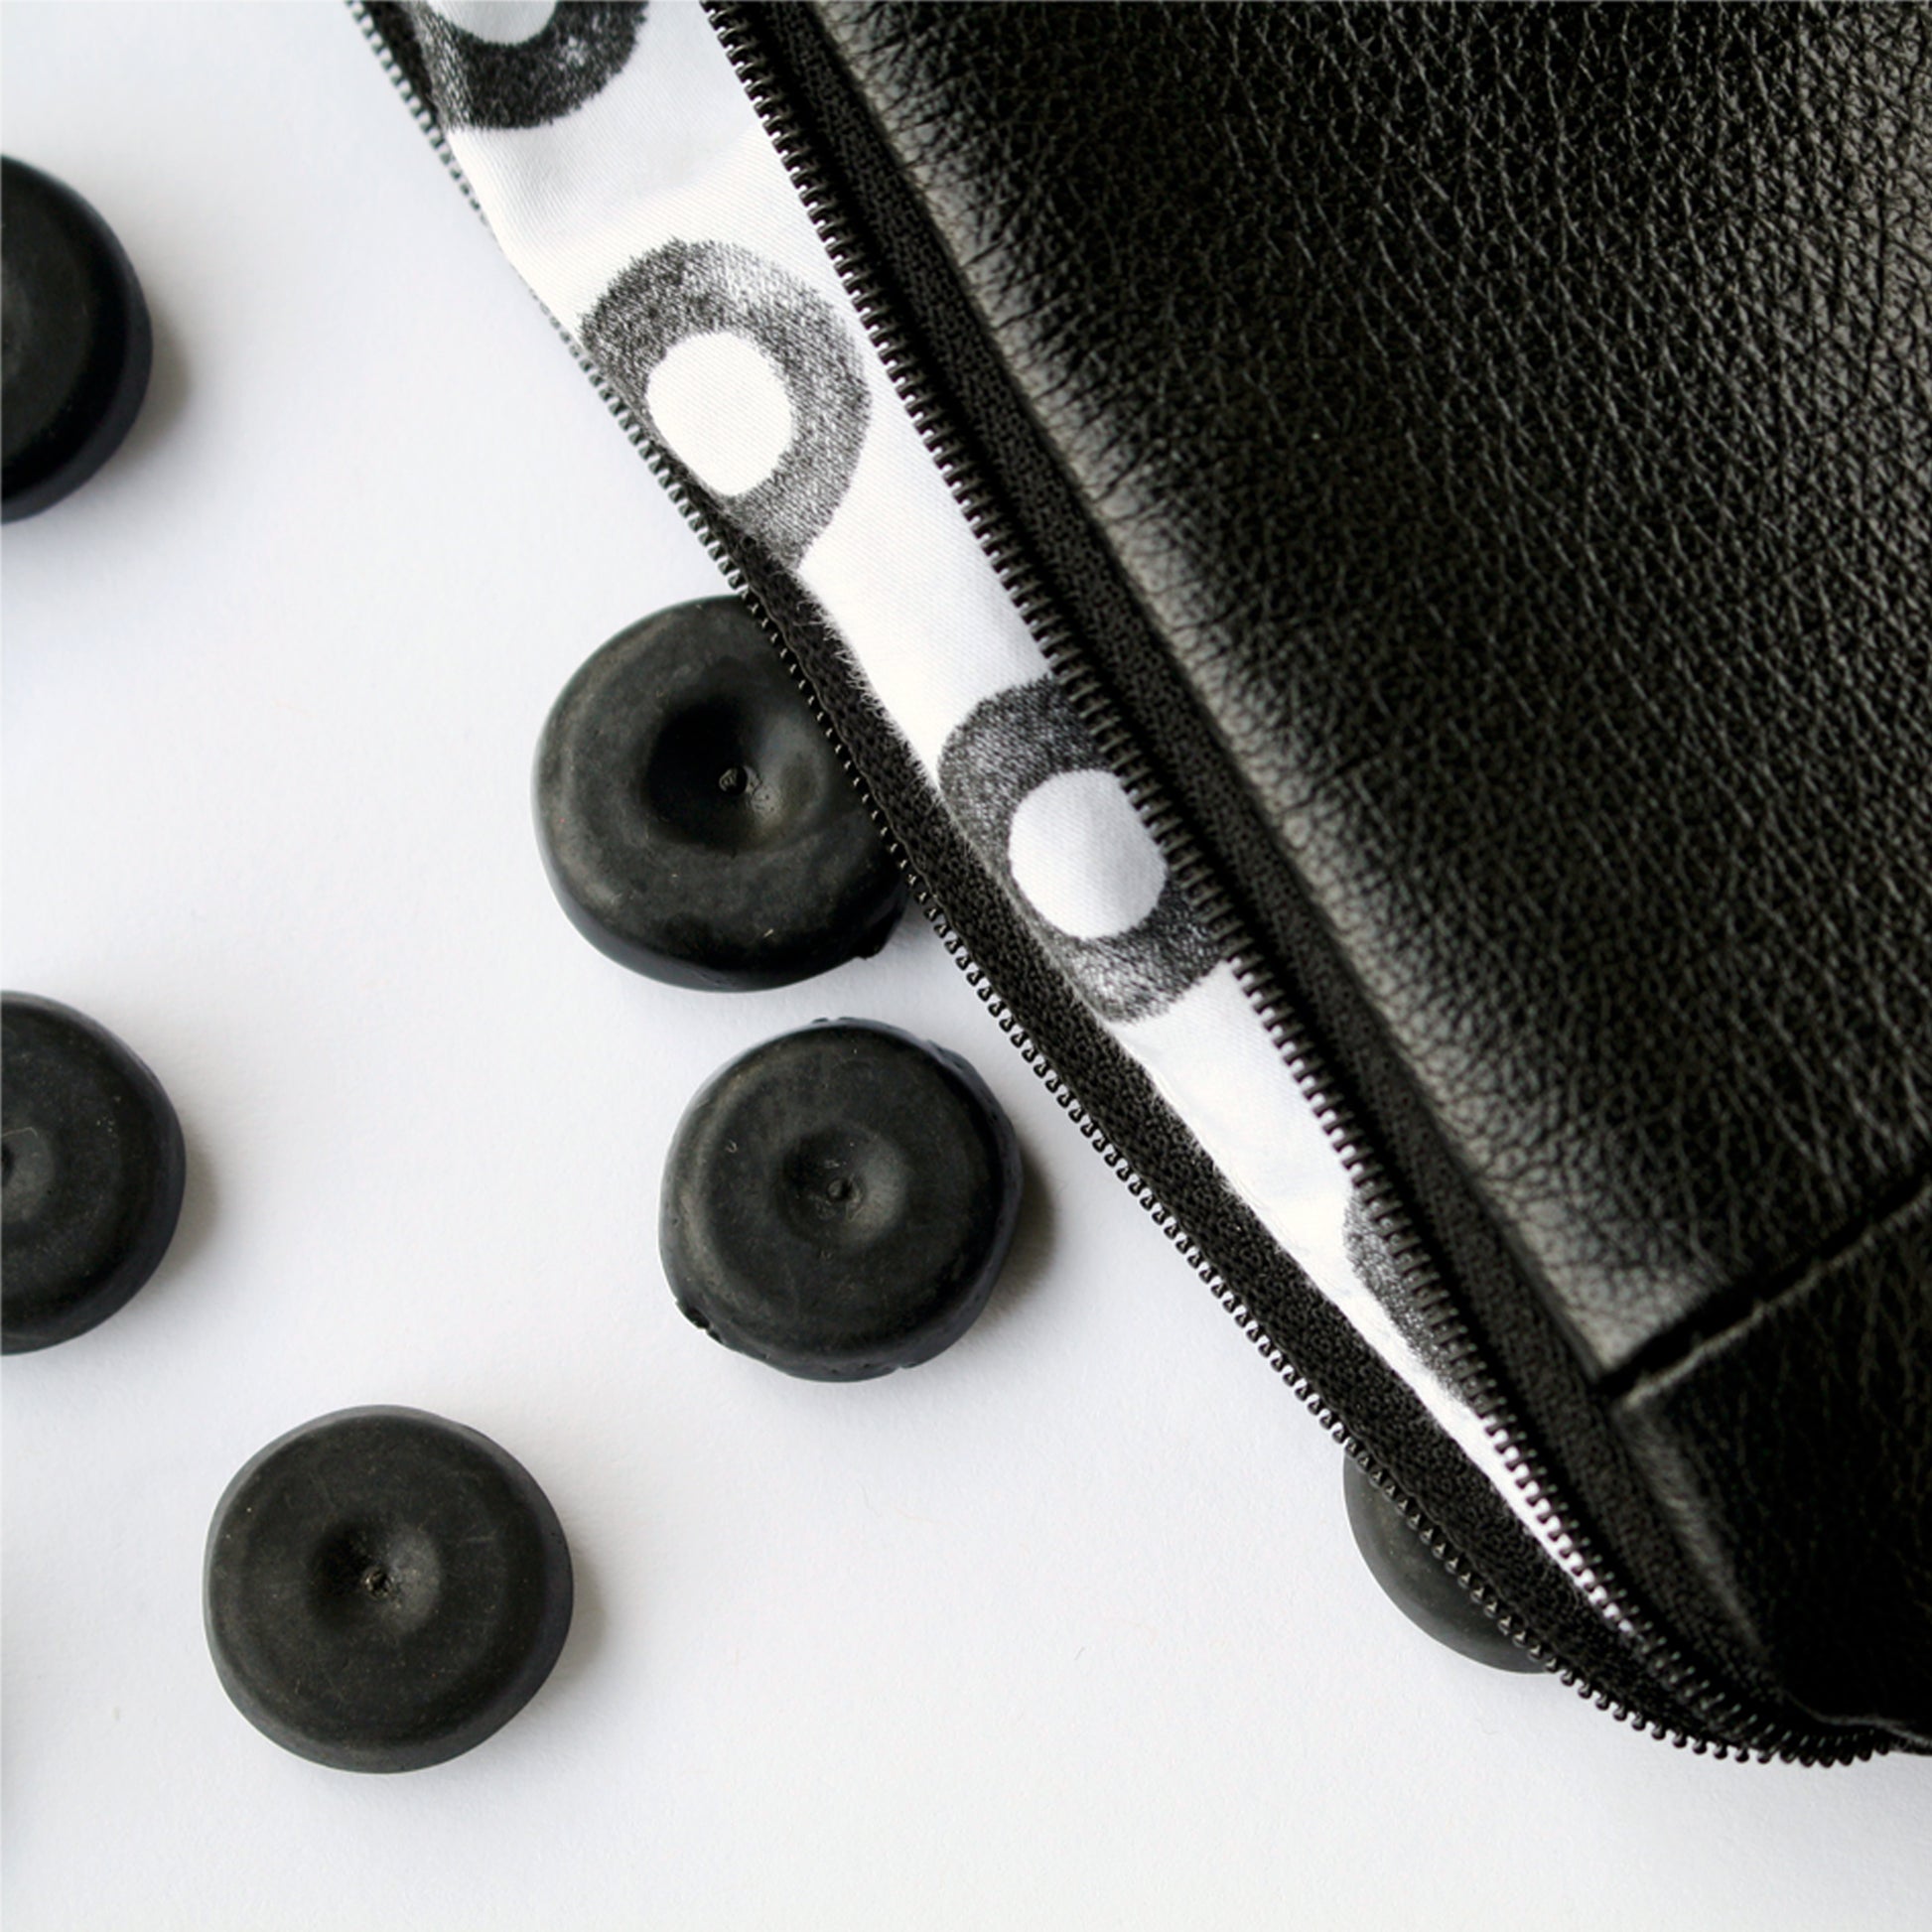 A close up image of a soft, black leather purse with hand printed lining. The lining is white cotton with small black rings on it. The purse is lying against a white surface. To the left of the image, are four small black rubber blanking plugs. 